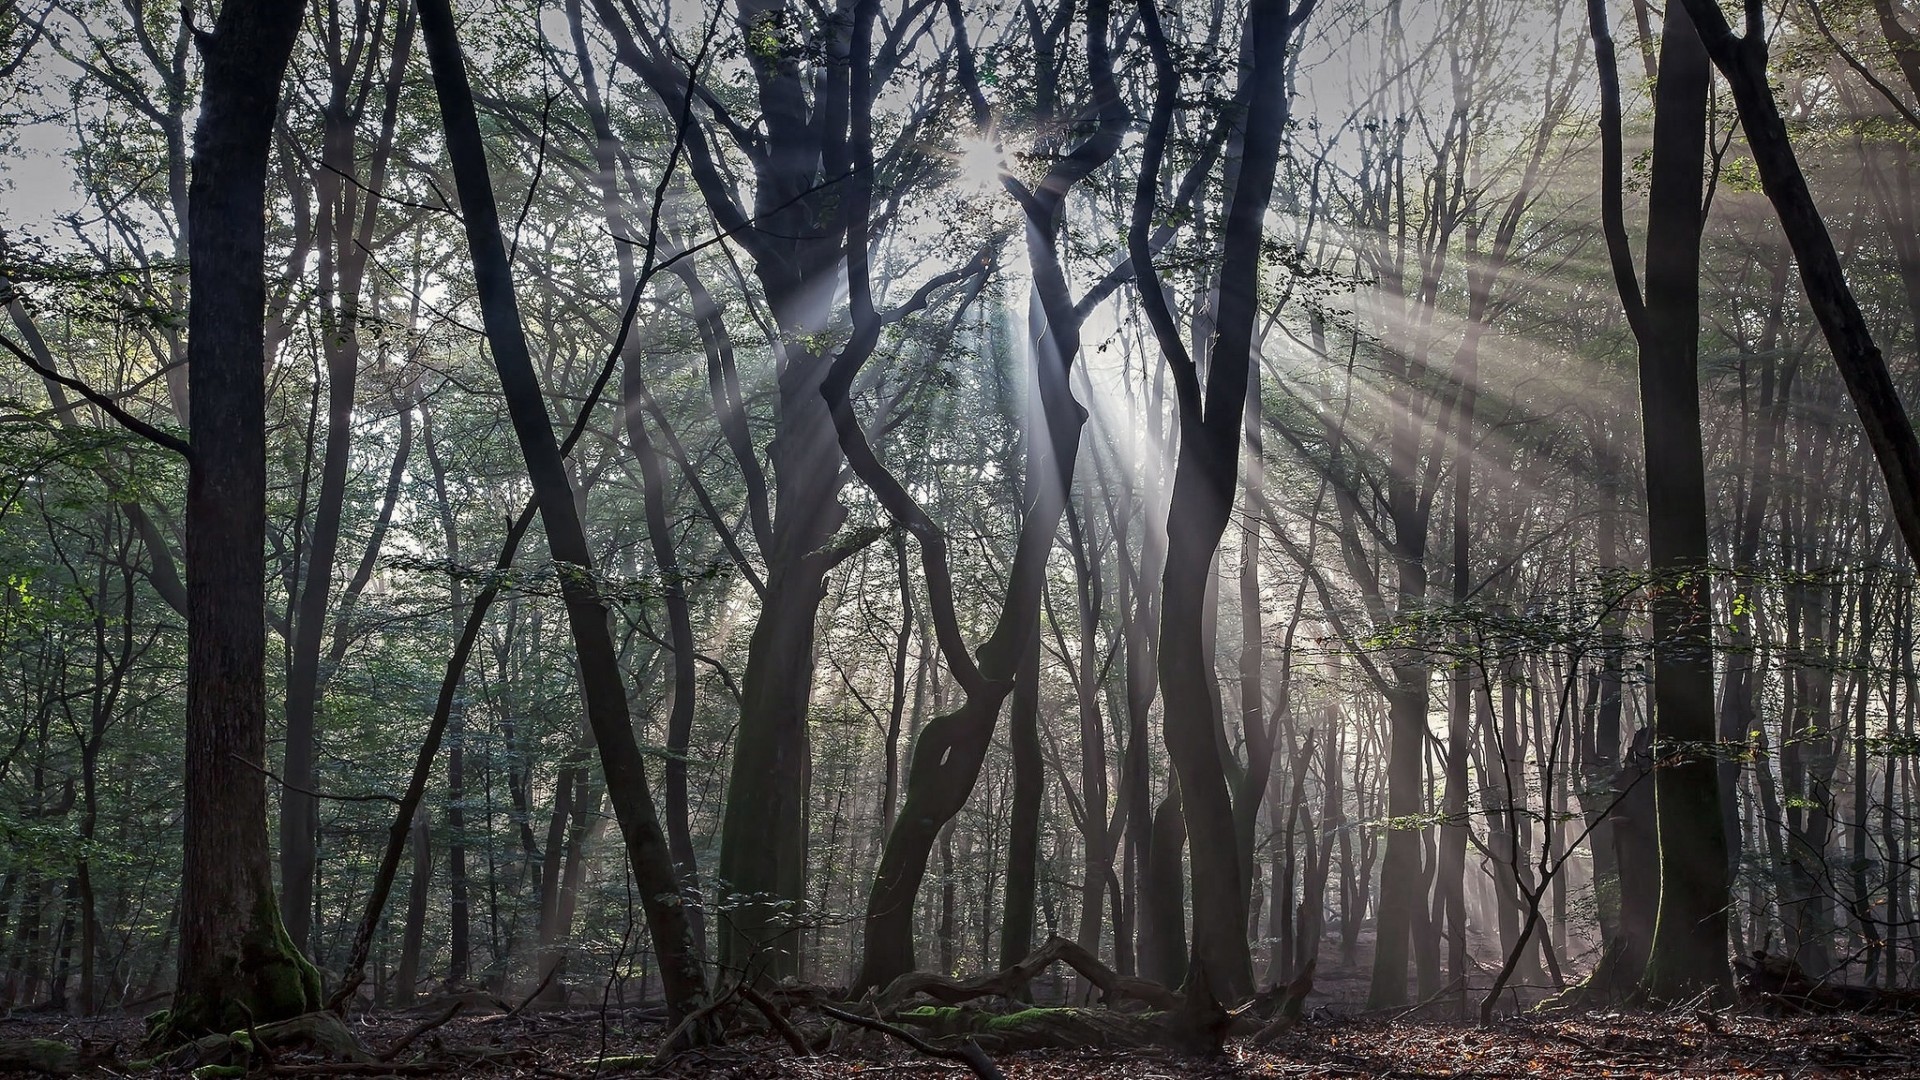 General 1920x1080 nature trees forest branch leaves wood mist sun rays dead trees silhouette moss